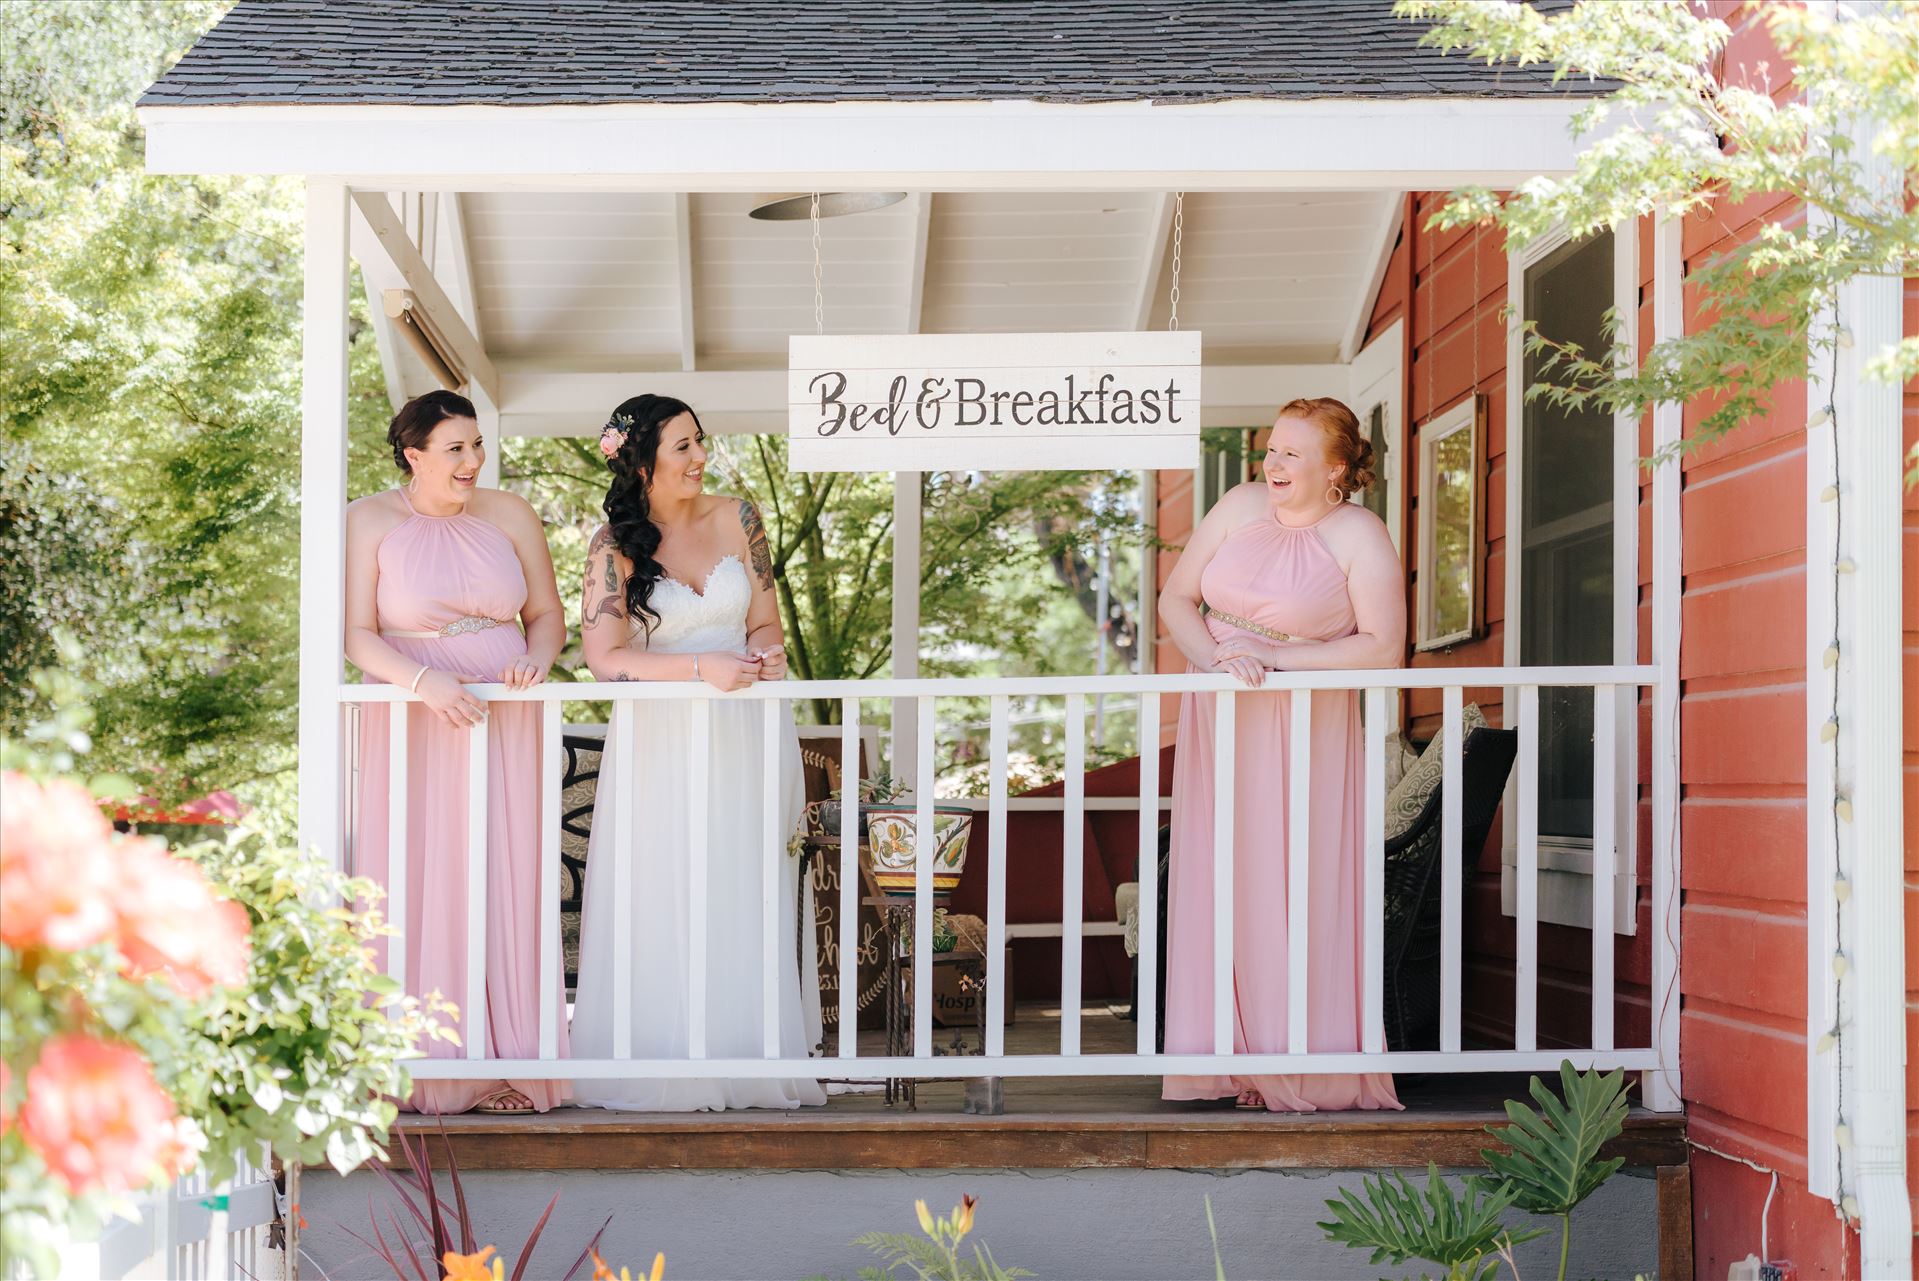 Kendra and Mitchell 032 - Emily House Bed and Breakfast Paso Robles California Wedding Photography by Mirrors Edge Photography. Bride and her bridesmaids by Sarah Williams